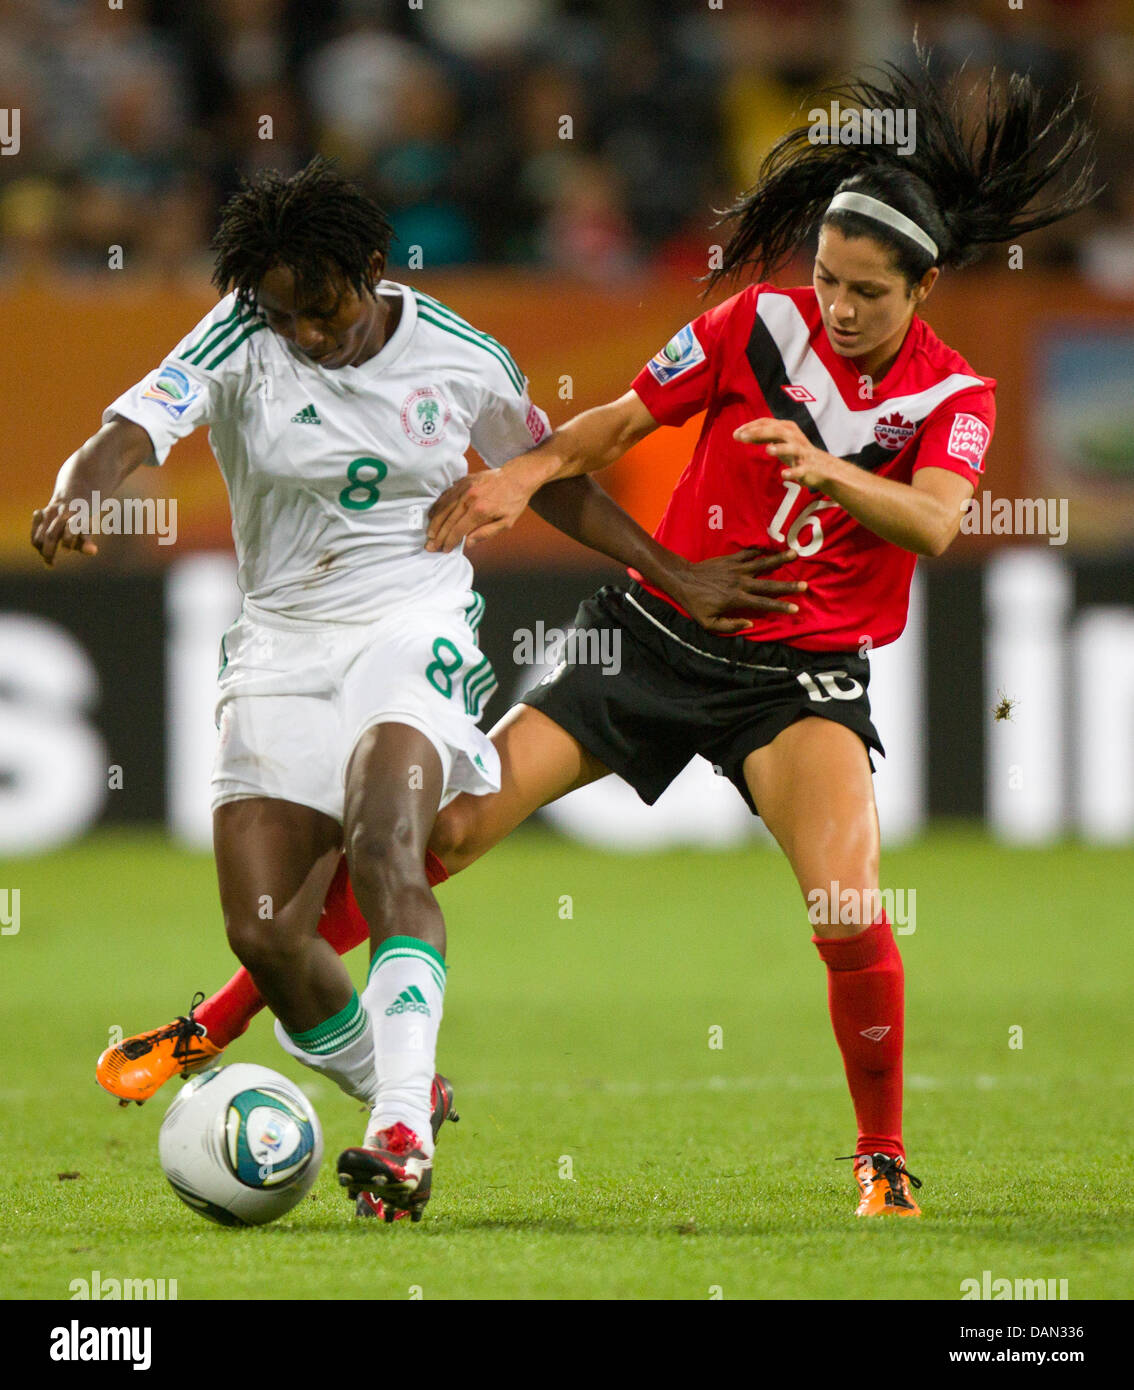 Ebere Orji (L) of Nigeria and Jonelle Filigno (R) of Canada fight for the ball during the Group A match Canada against Nigeria of FIFA Women's World Cup soccer tournament at the Rudolf Harbig Stadium in Dresden, Germany, 05 July 2011. Foto: Jens Wolf dpa/lsn  +++(c) dpa - Bildfunk+++ Stock Photo